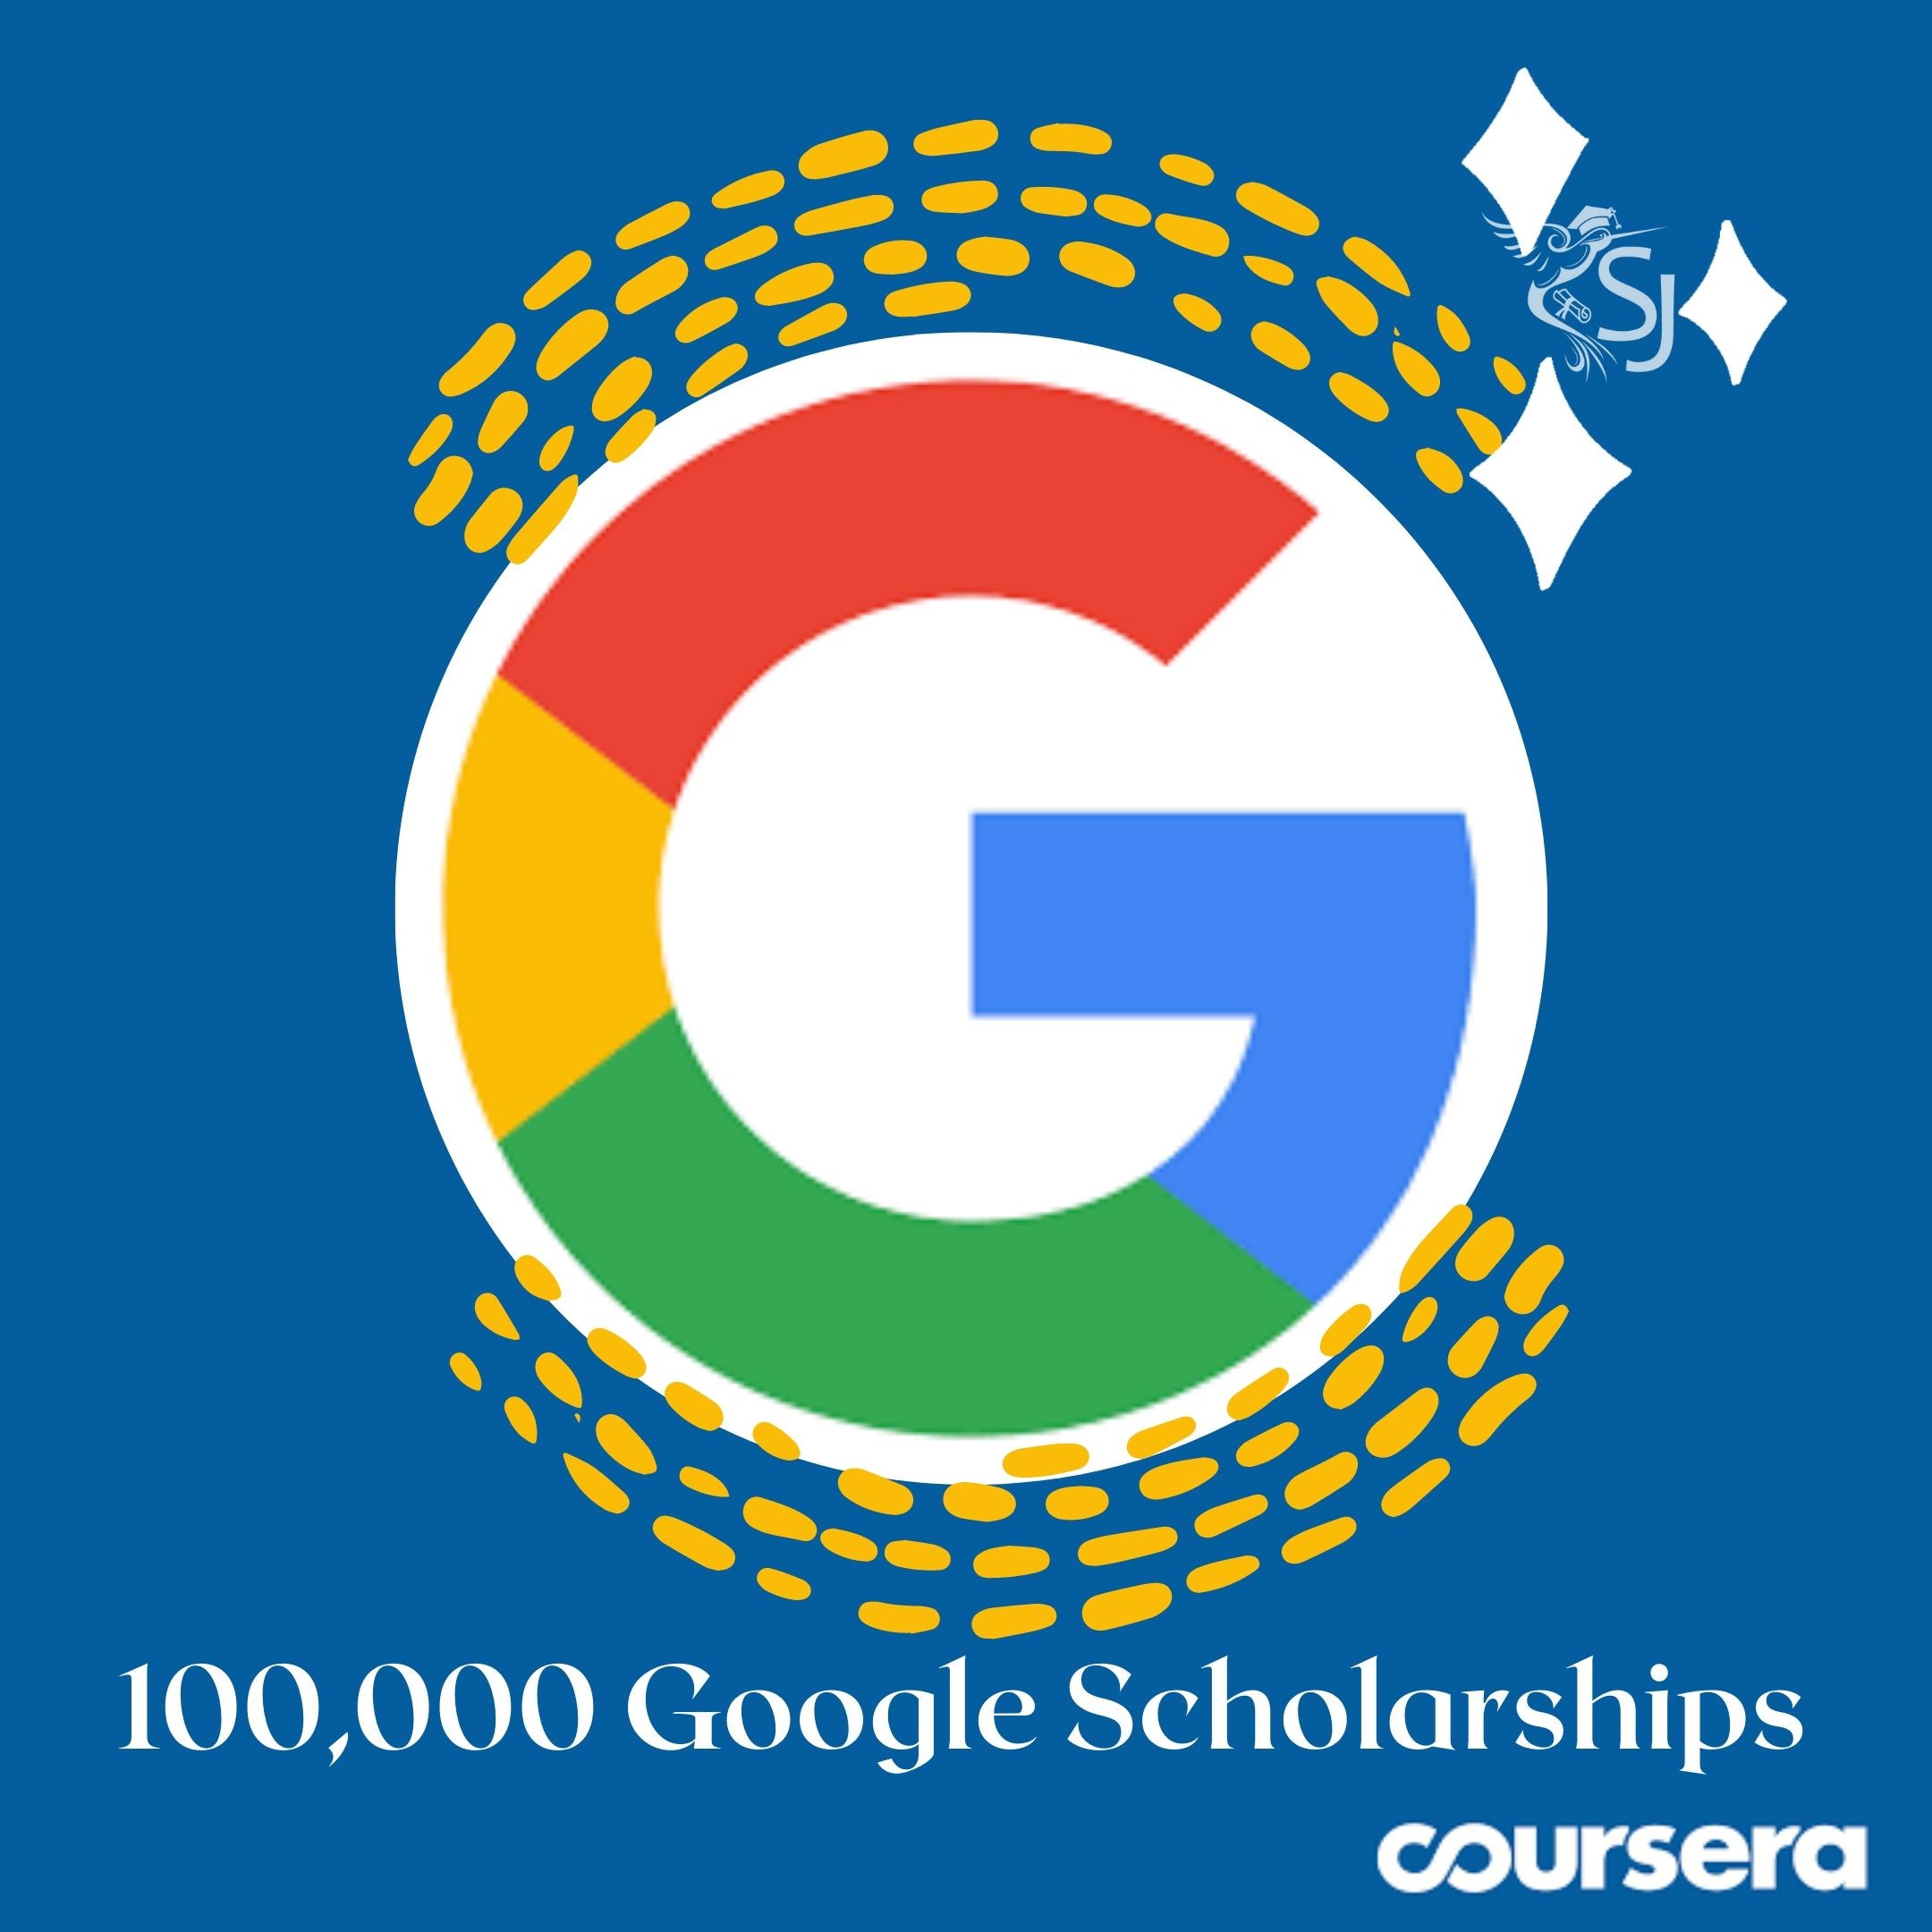 Google Scholarships 100k Awards for Certificate Courses on Coursera